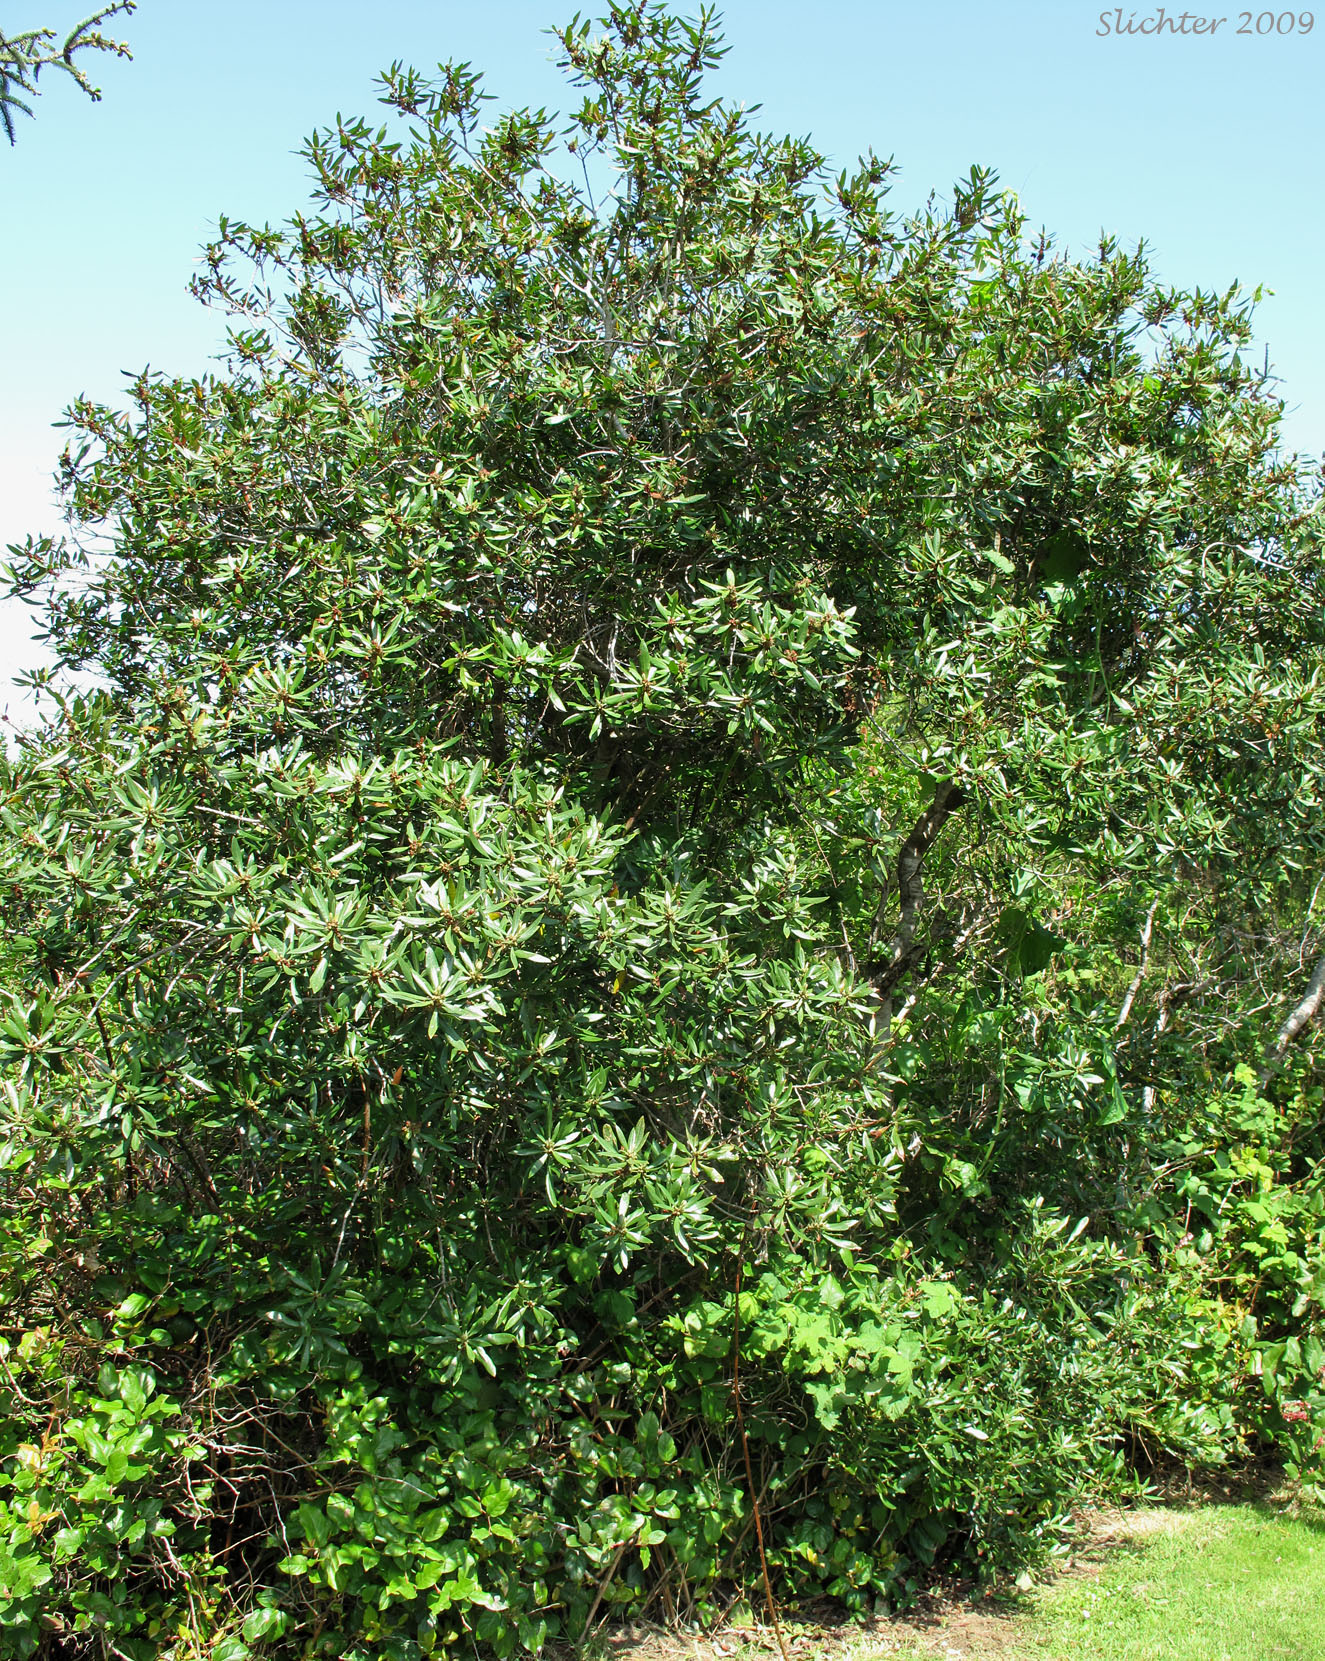 Pacific Bayberry, Pacific Wax Myrtle, Western Wax Myrtle: Myrica californica (Synonyms: Gale californica, Morella californica)